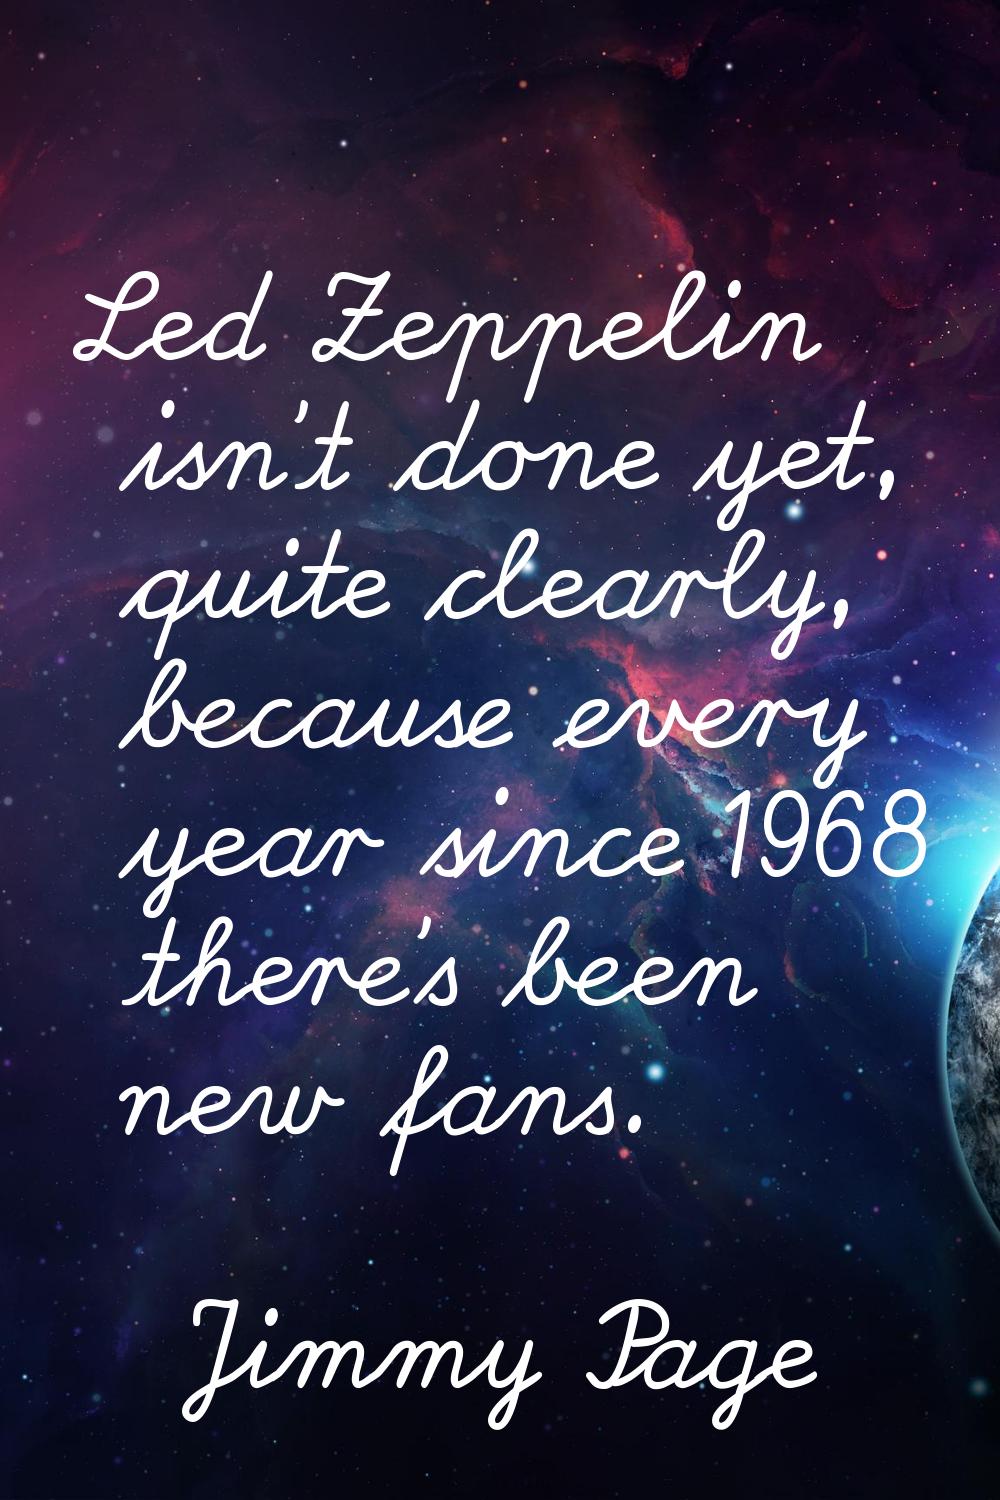 Led Zeppelin isn't done yet, quite clearly, because every year since 1968 there's been new fans.